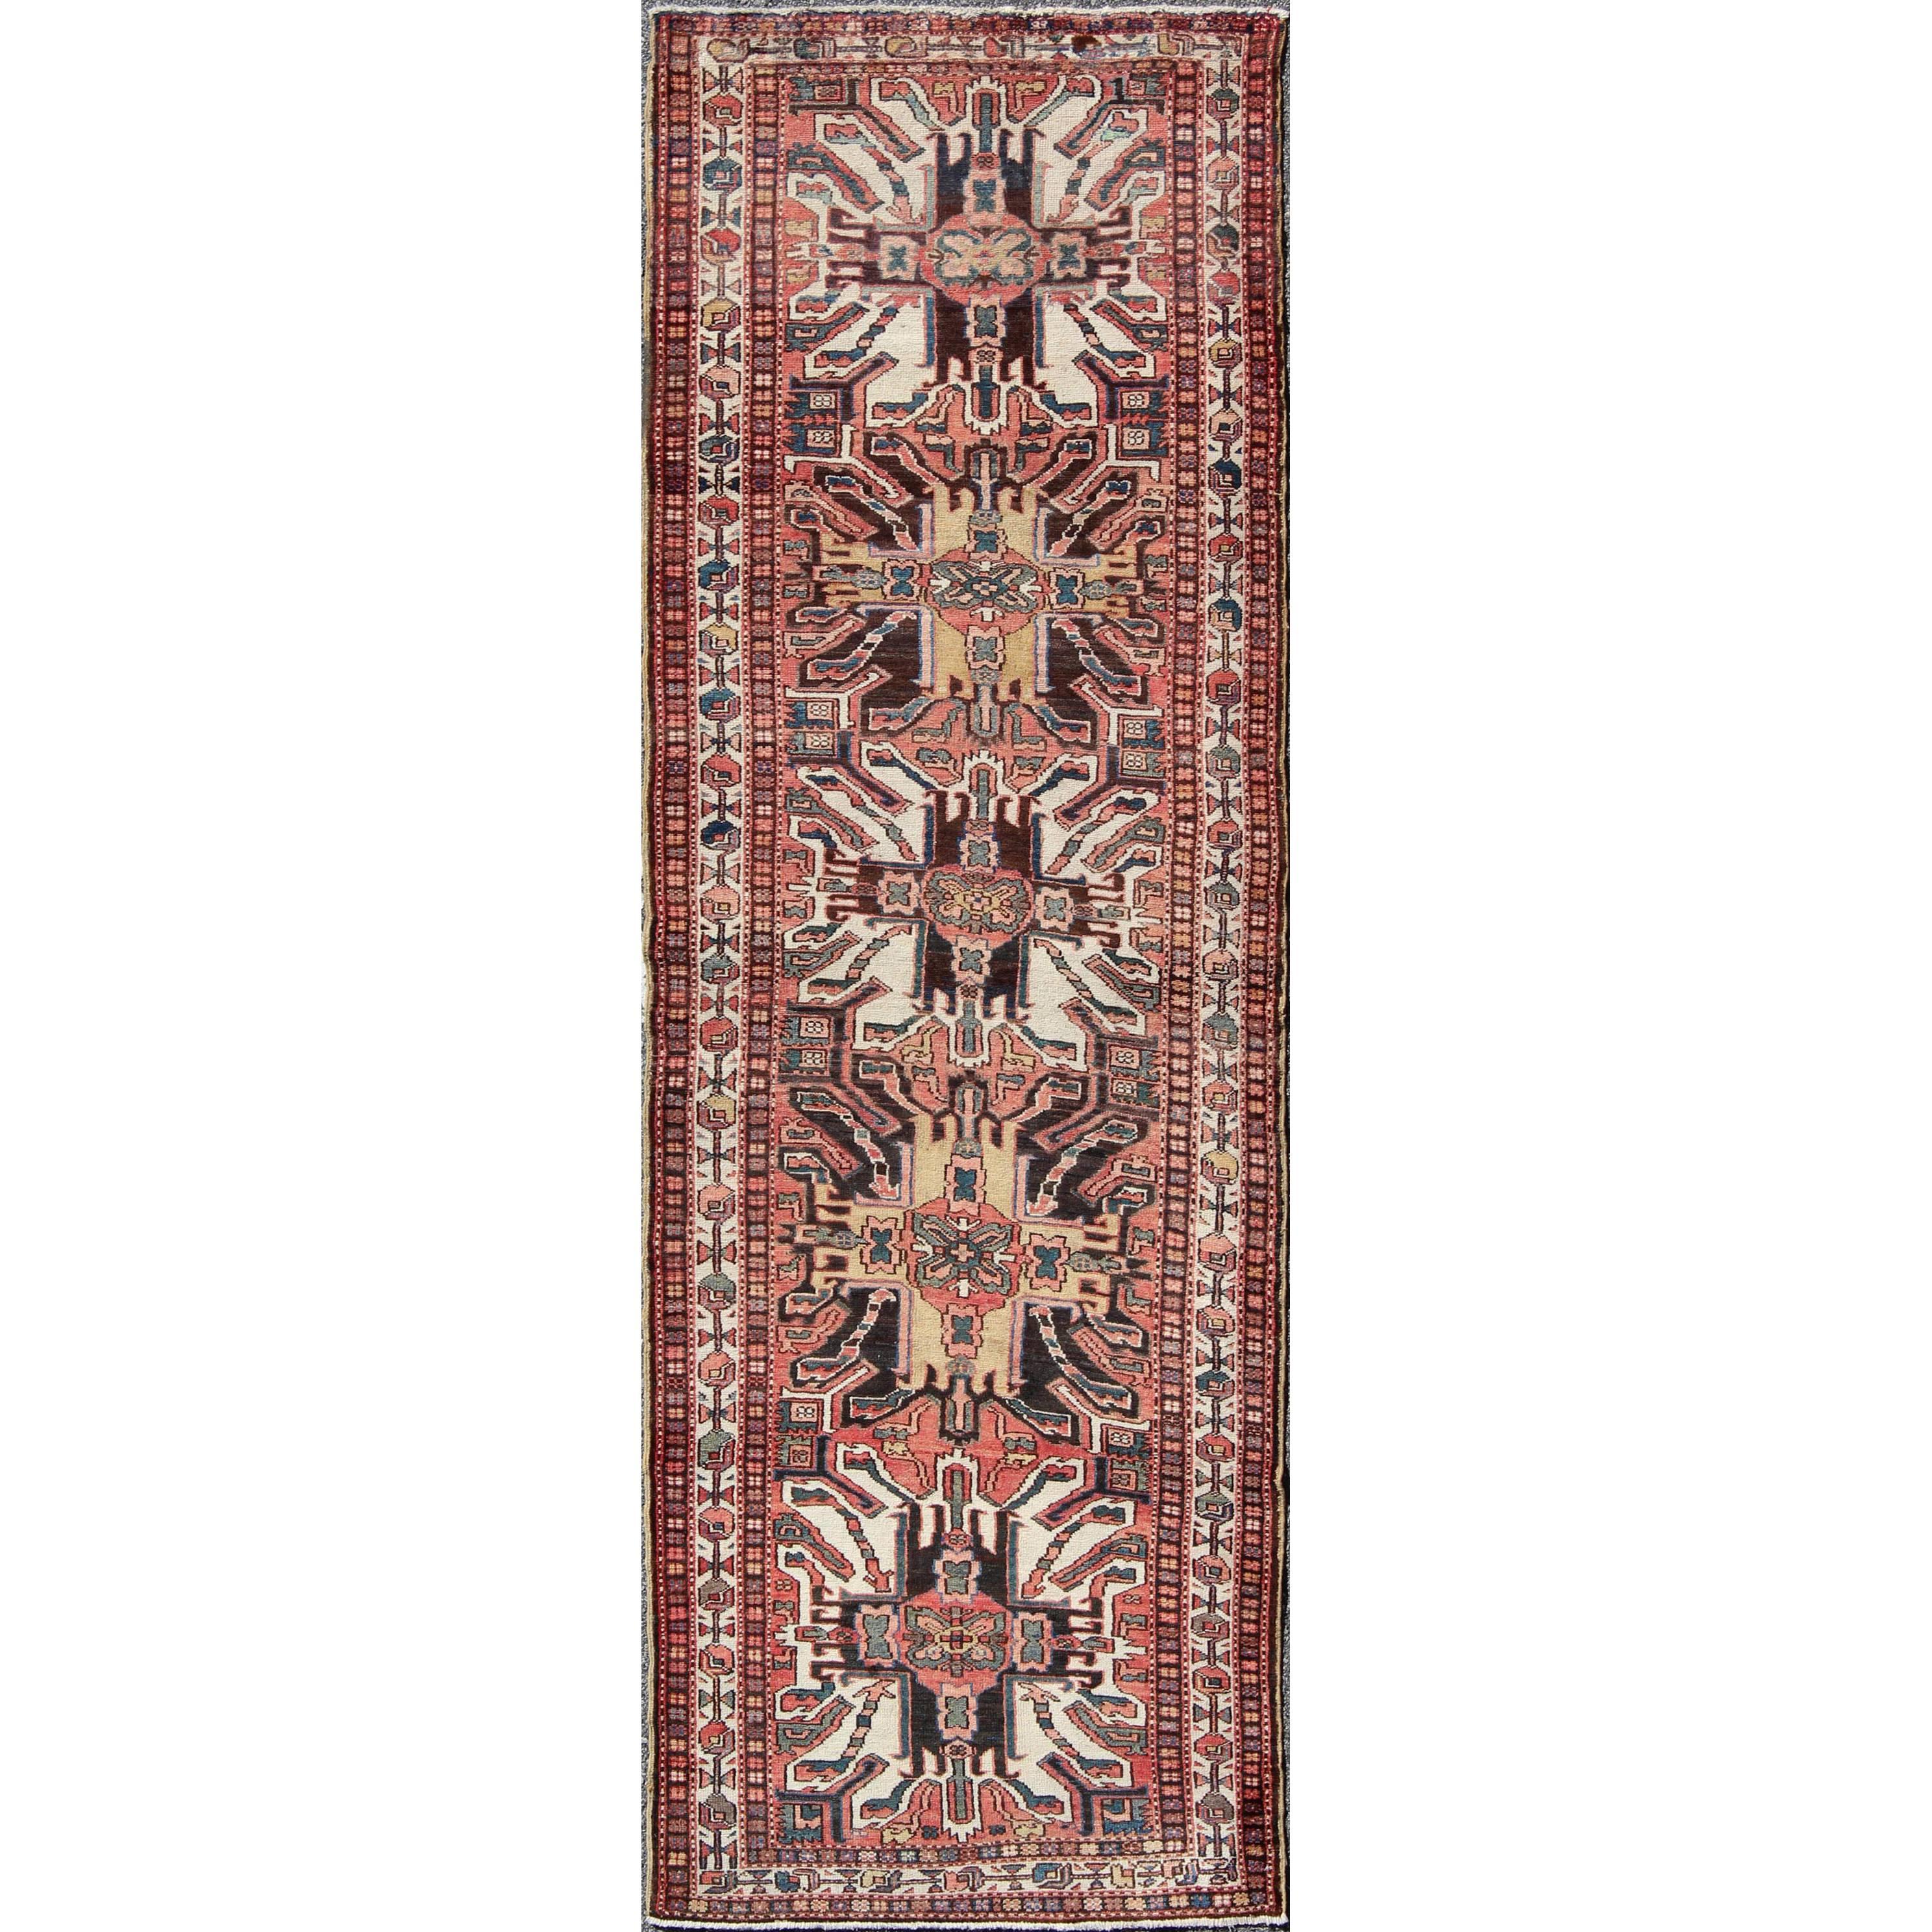 Multicolored Antique Persian Karajeh Runner with Geometric-Tribal Medallions